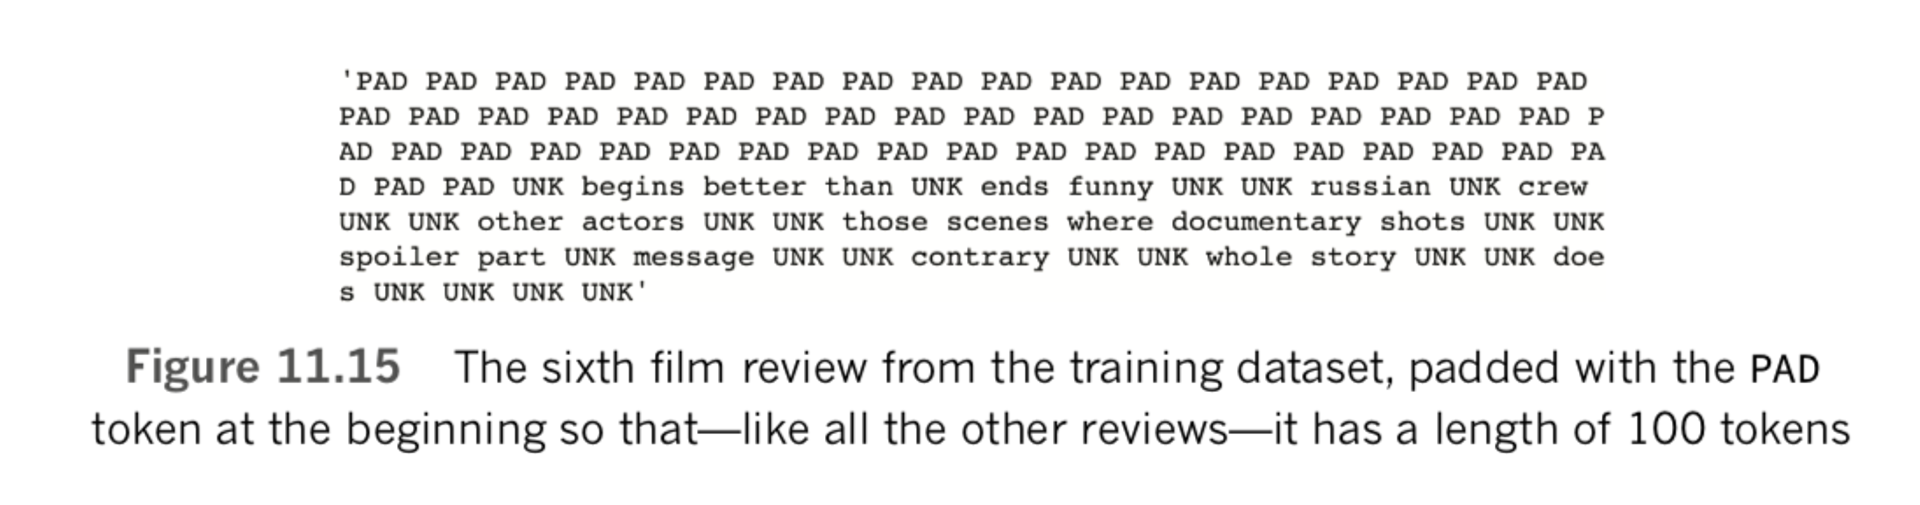 The sixth film review from the training dataset, padded with the PAD token at the beginning so that - like all the other reviews - it has a 100 token length